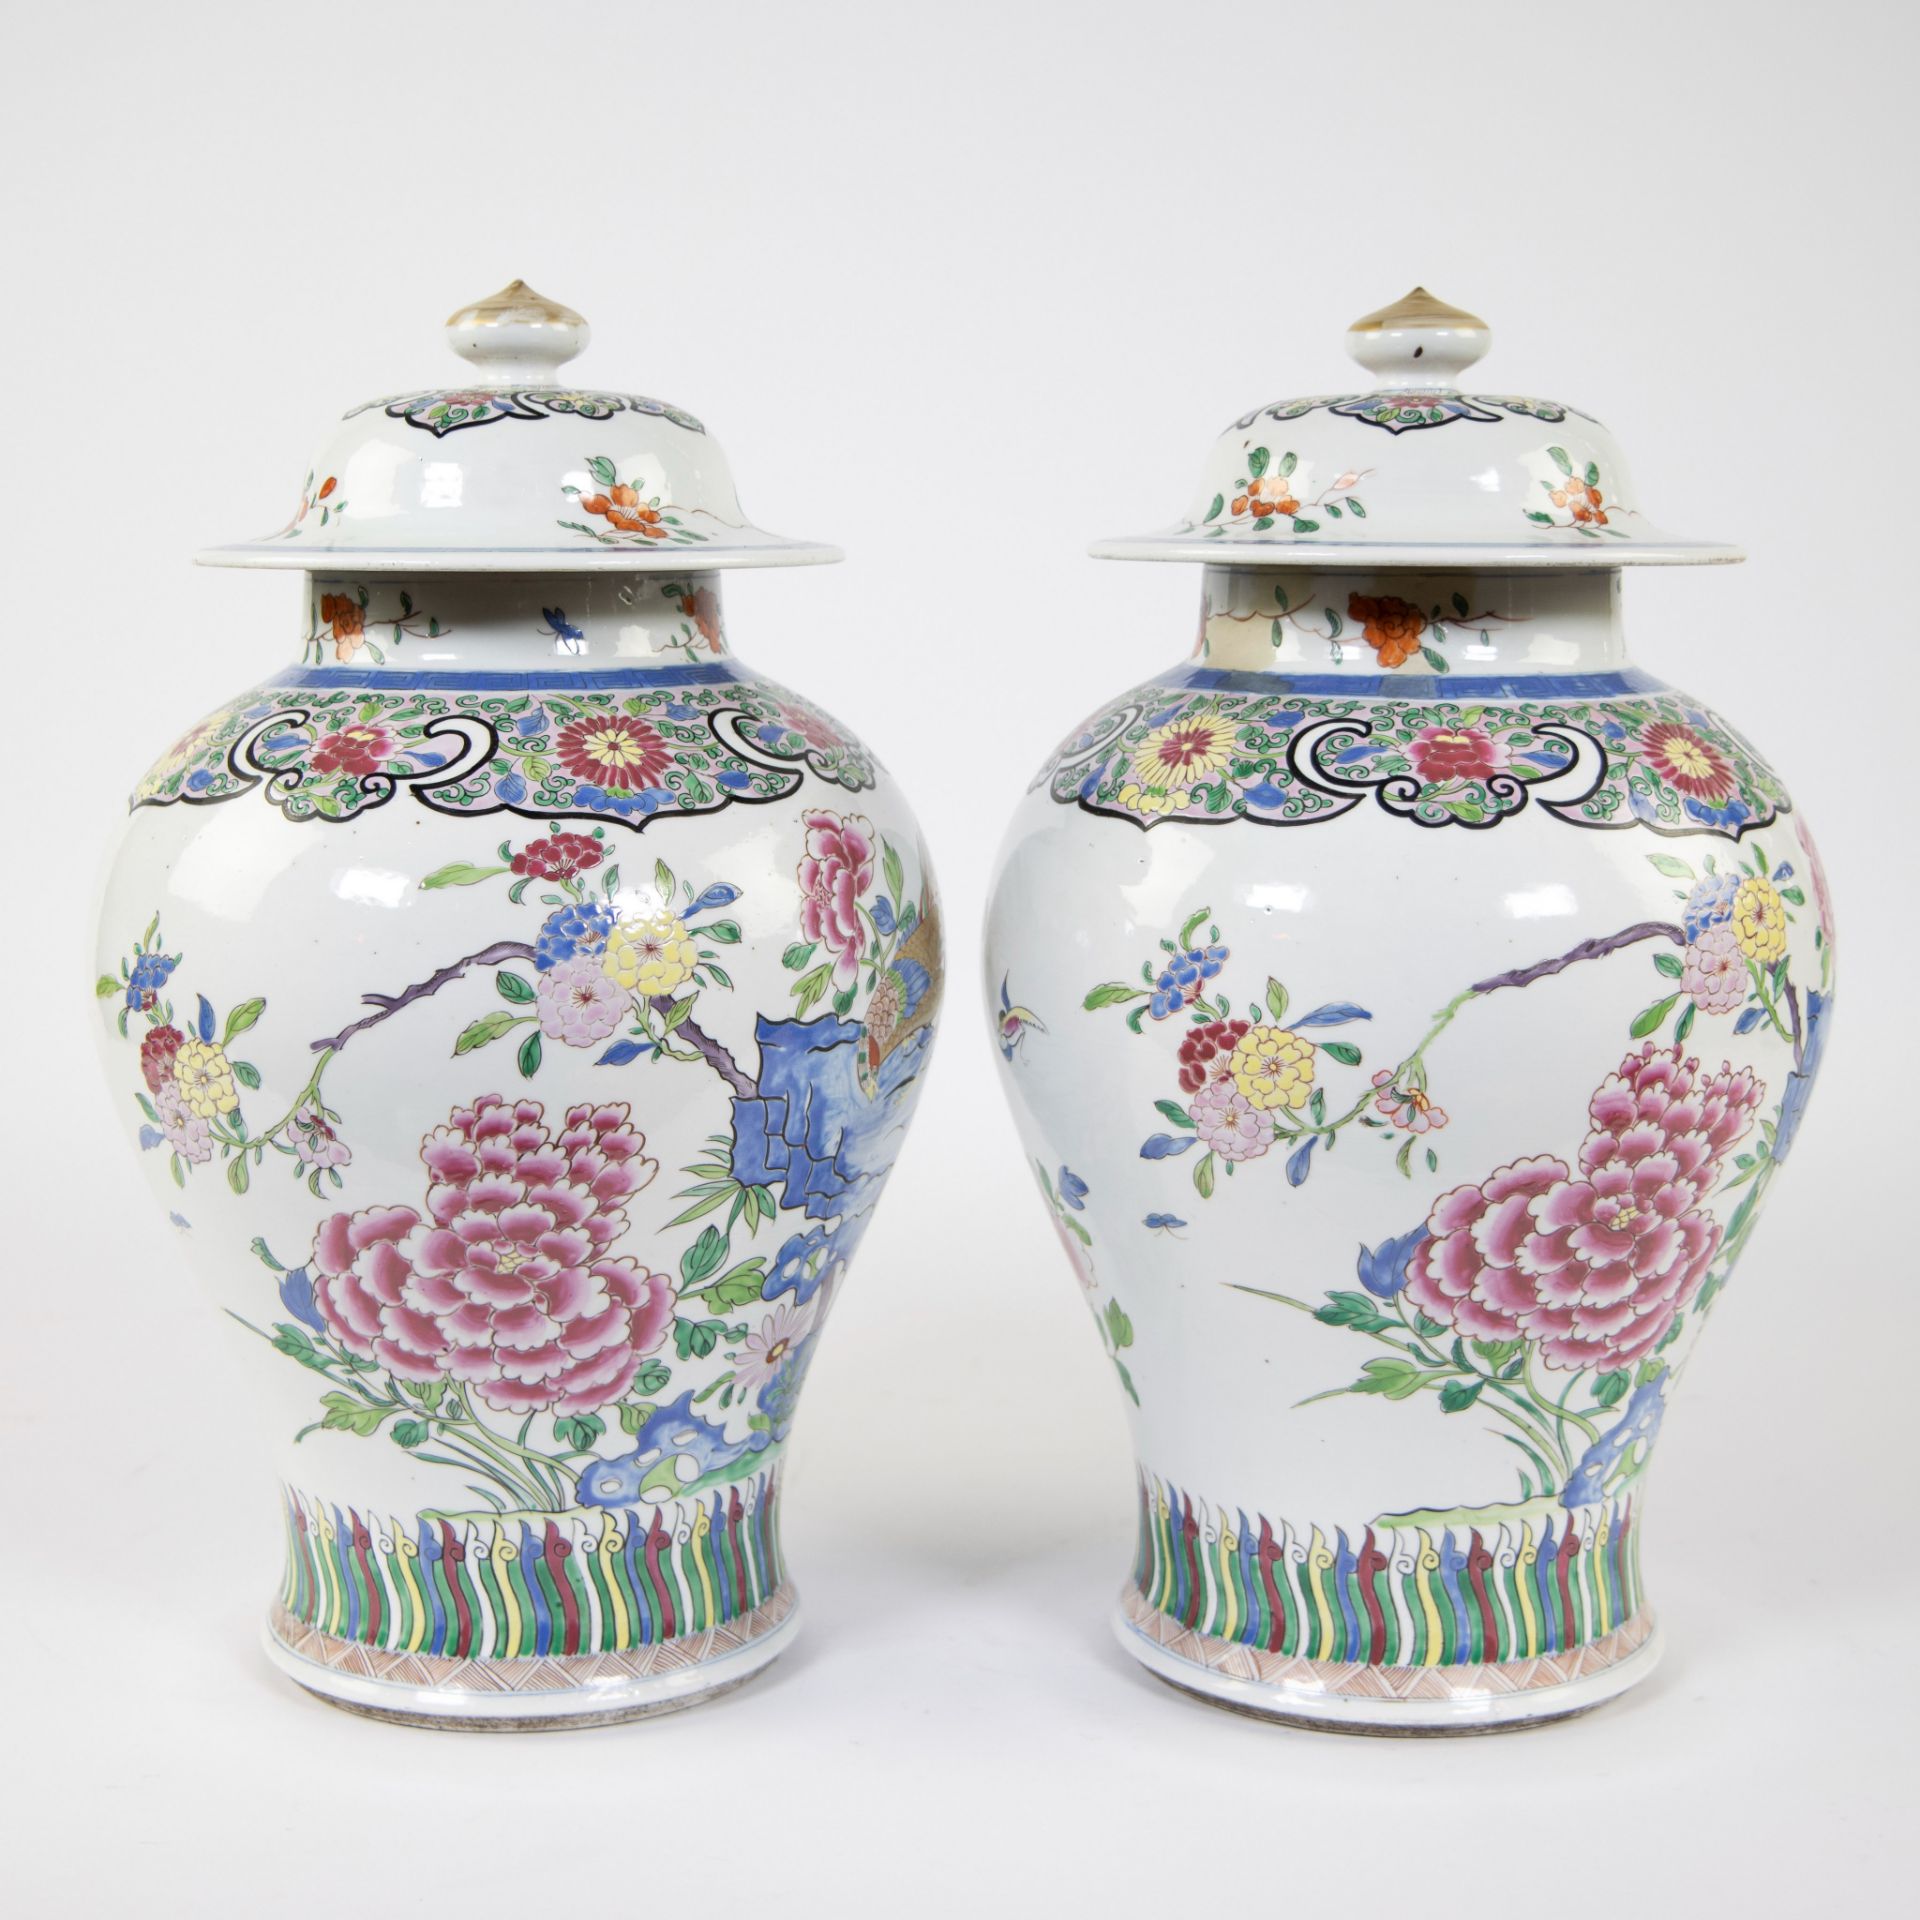 Pair of Samson lidded famille rose vases with decoration of pheasant on blue rock, 19th century - Image 4 of 12